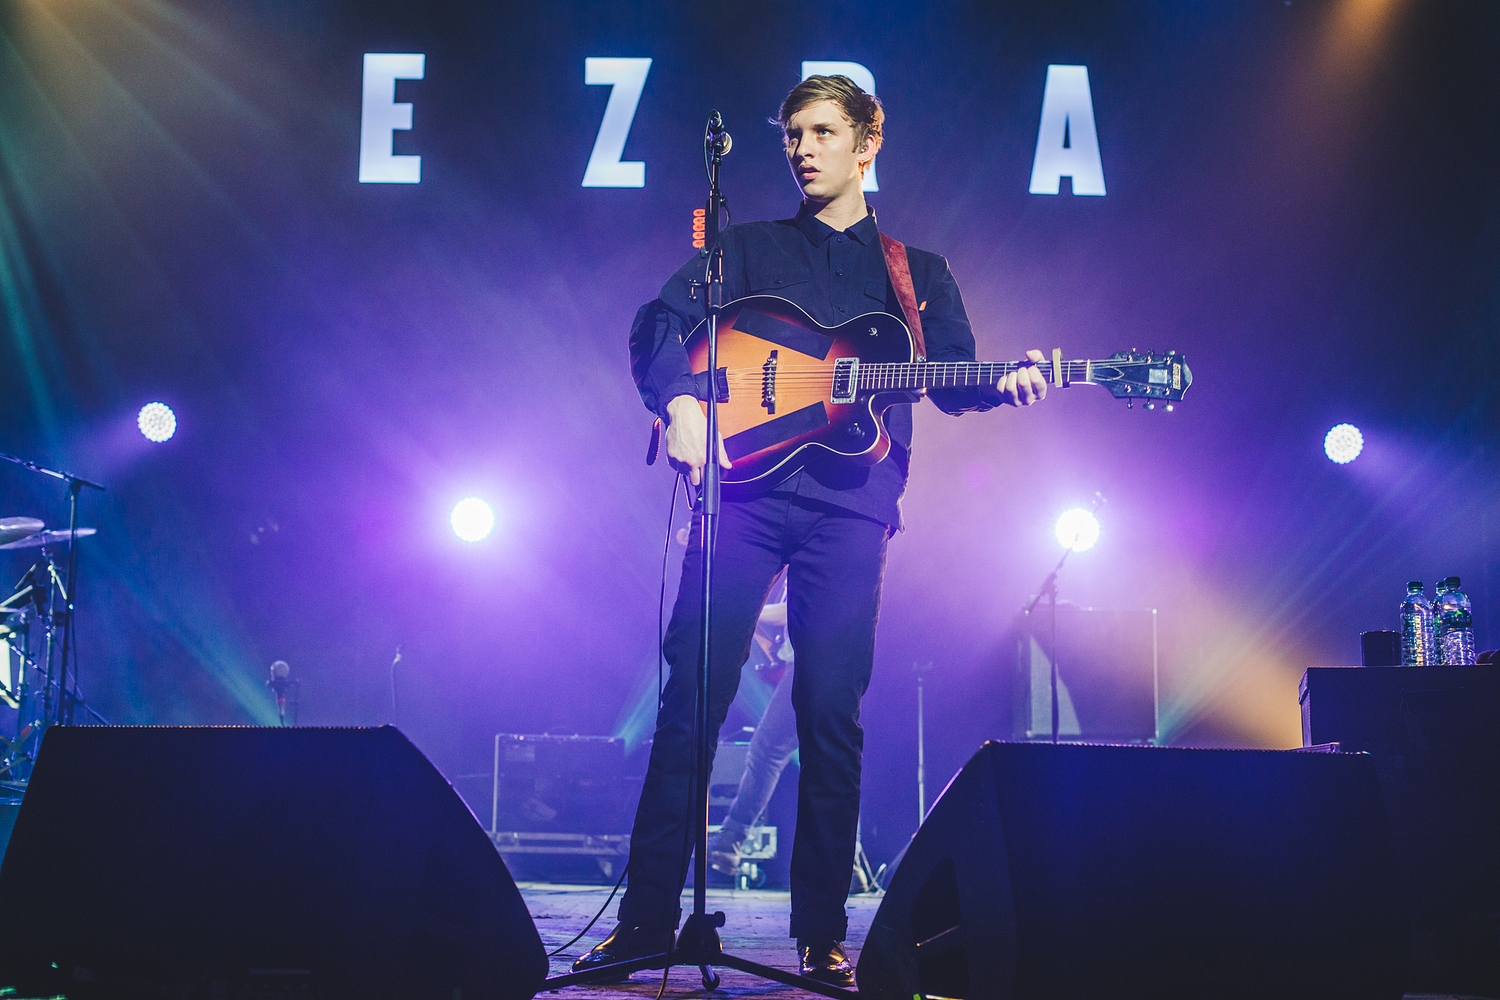 George Ezra - All My Love (Official Audio) 